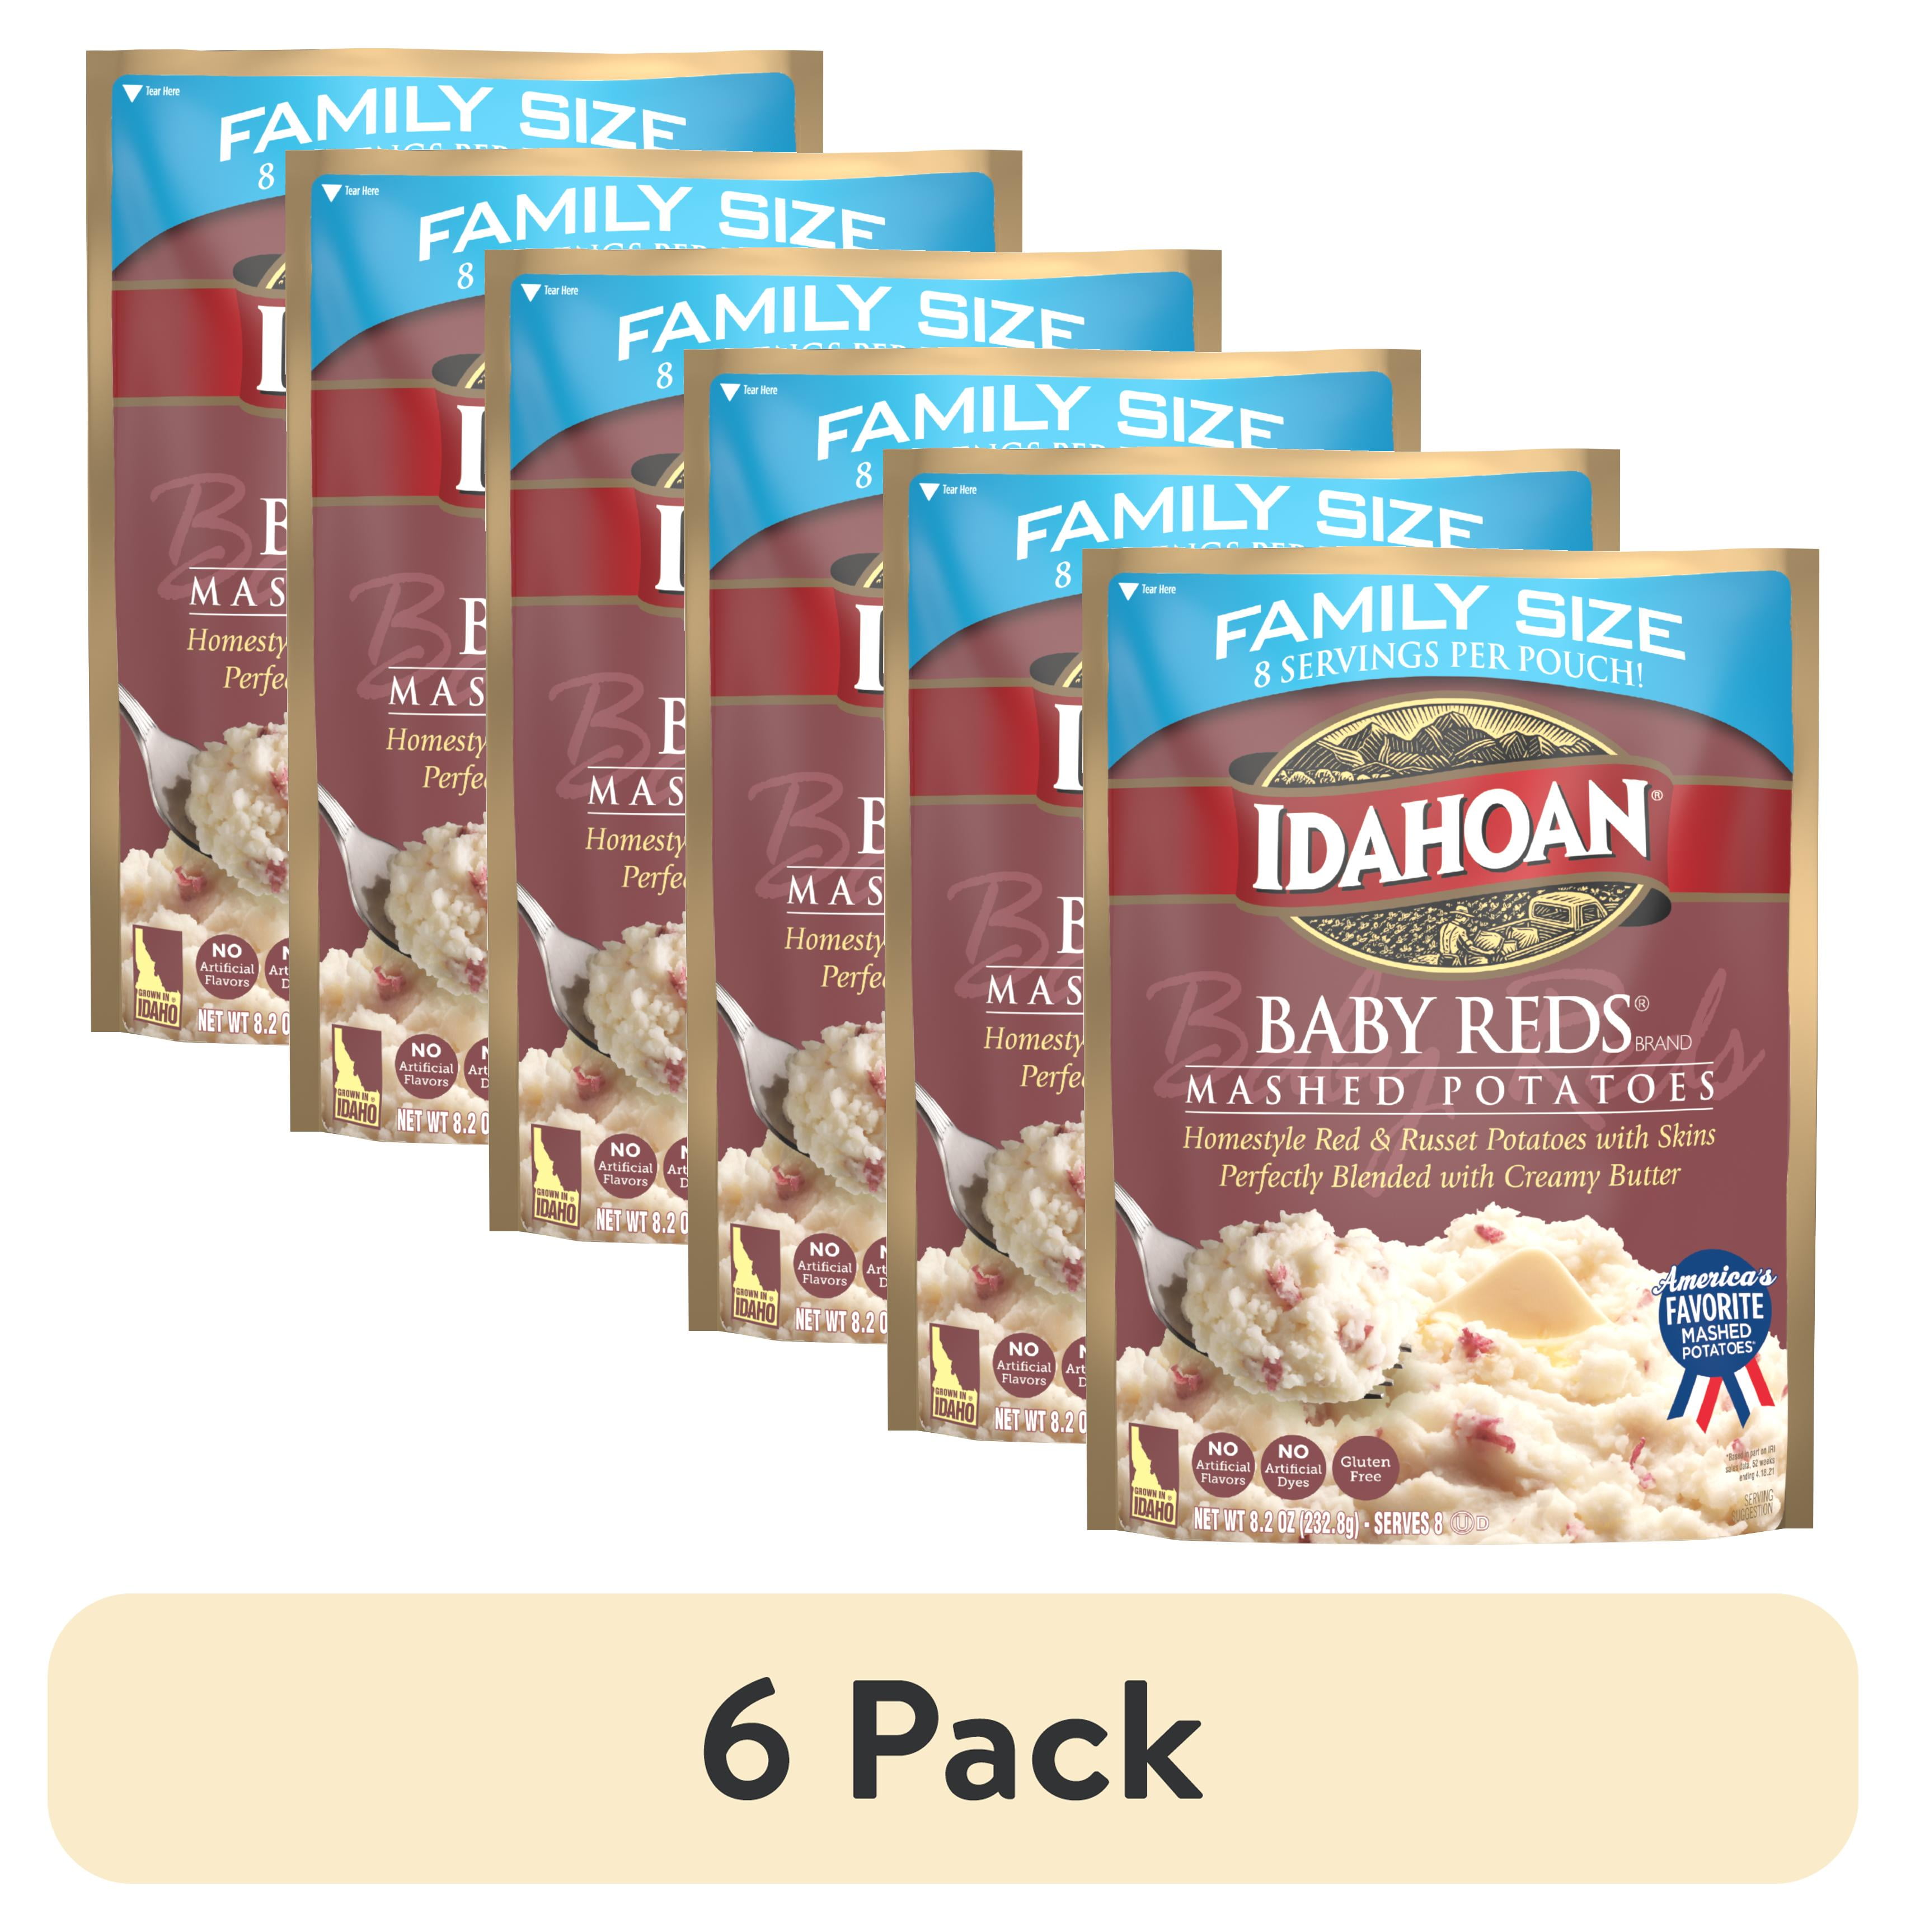 Idahoan Baby Reds with Roasted Garlic & Parm Mashed Potatoes Family Size